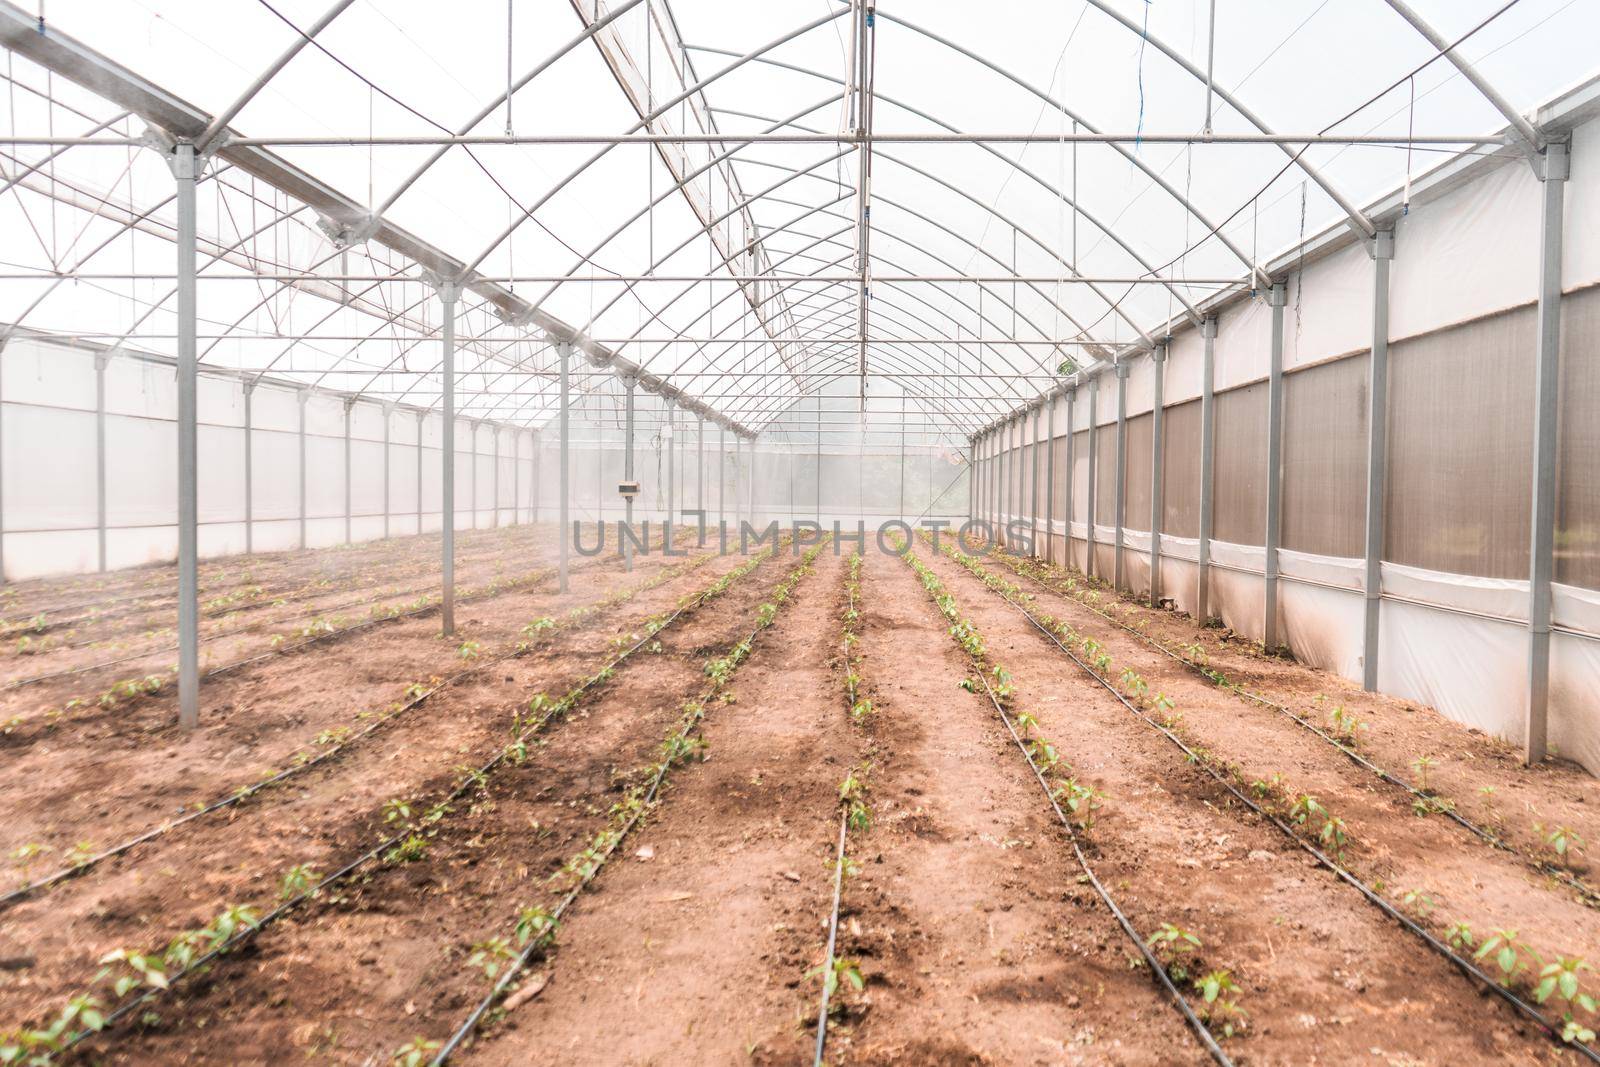 Interior of a sweet pepper greenhouse. Concept of technology to improve food in Nicaragua, Central America and Latin America.